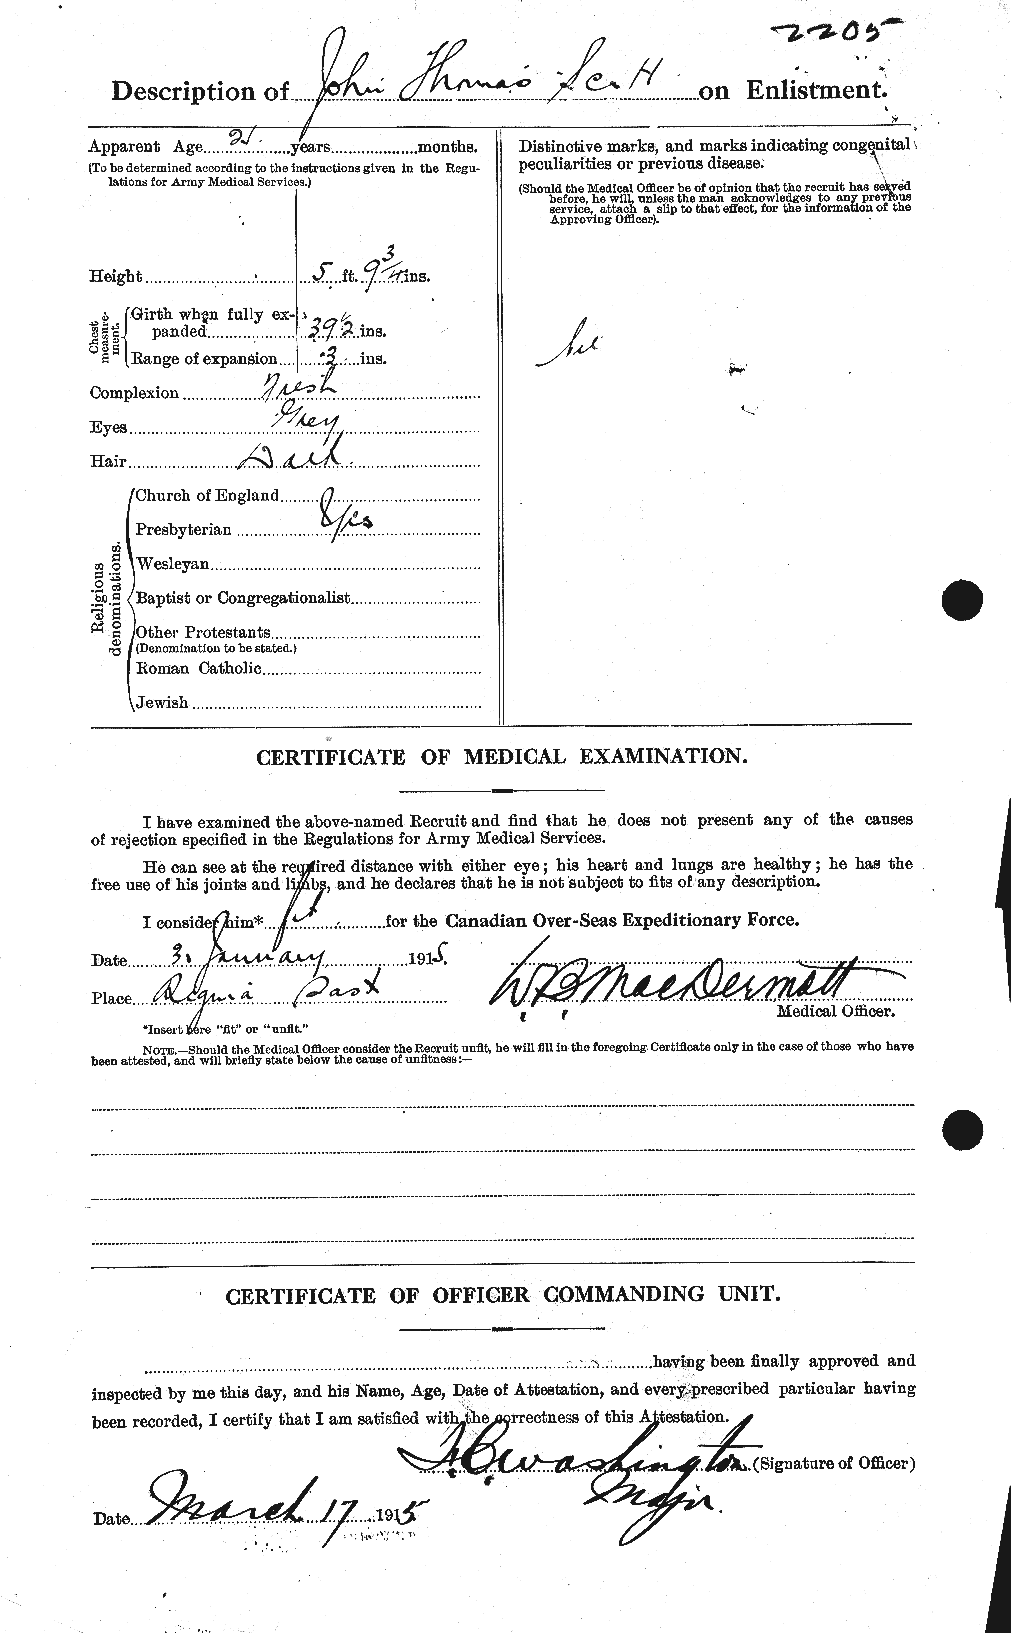 Personnel Records of the First World War - CEF 084418b